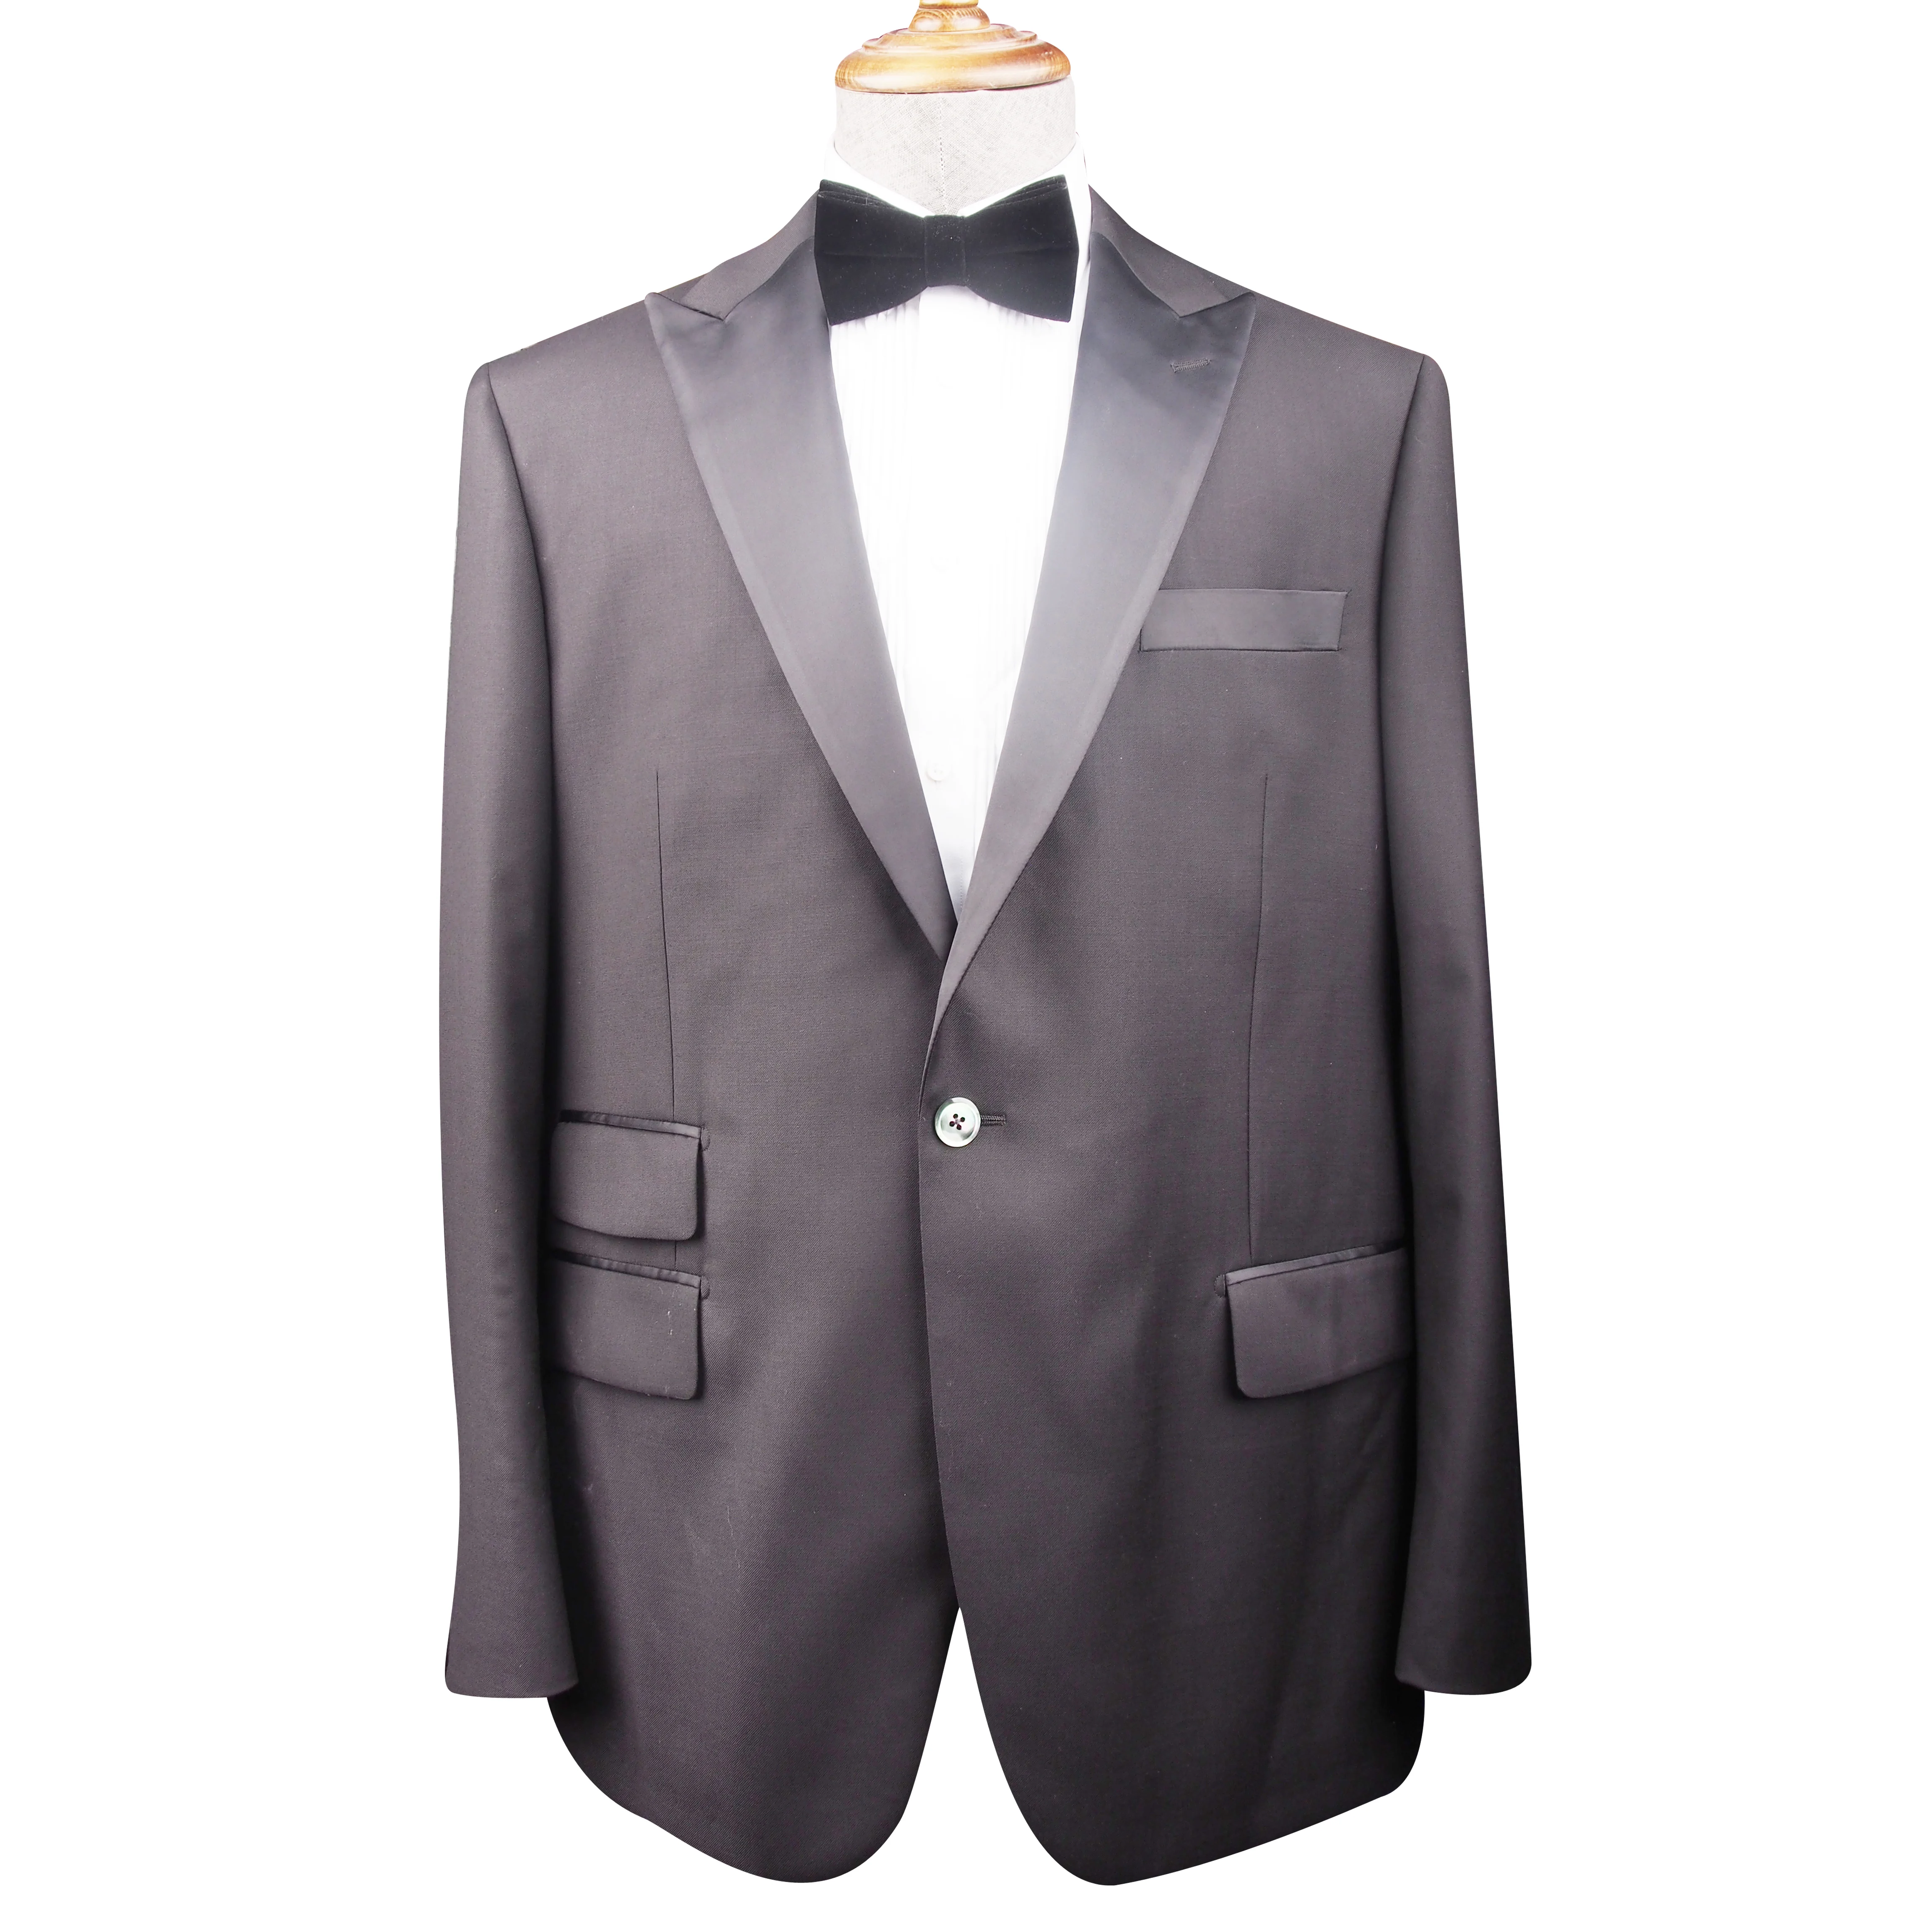 made in China wholesale 2 κομμάτια 100% Wool  Tuxedo Suit modern men’s suit